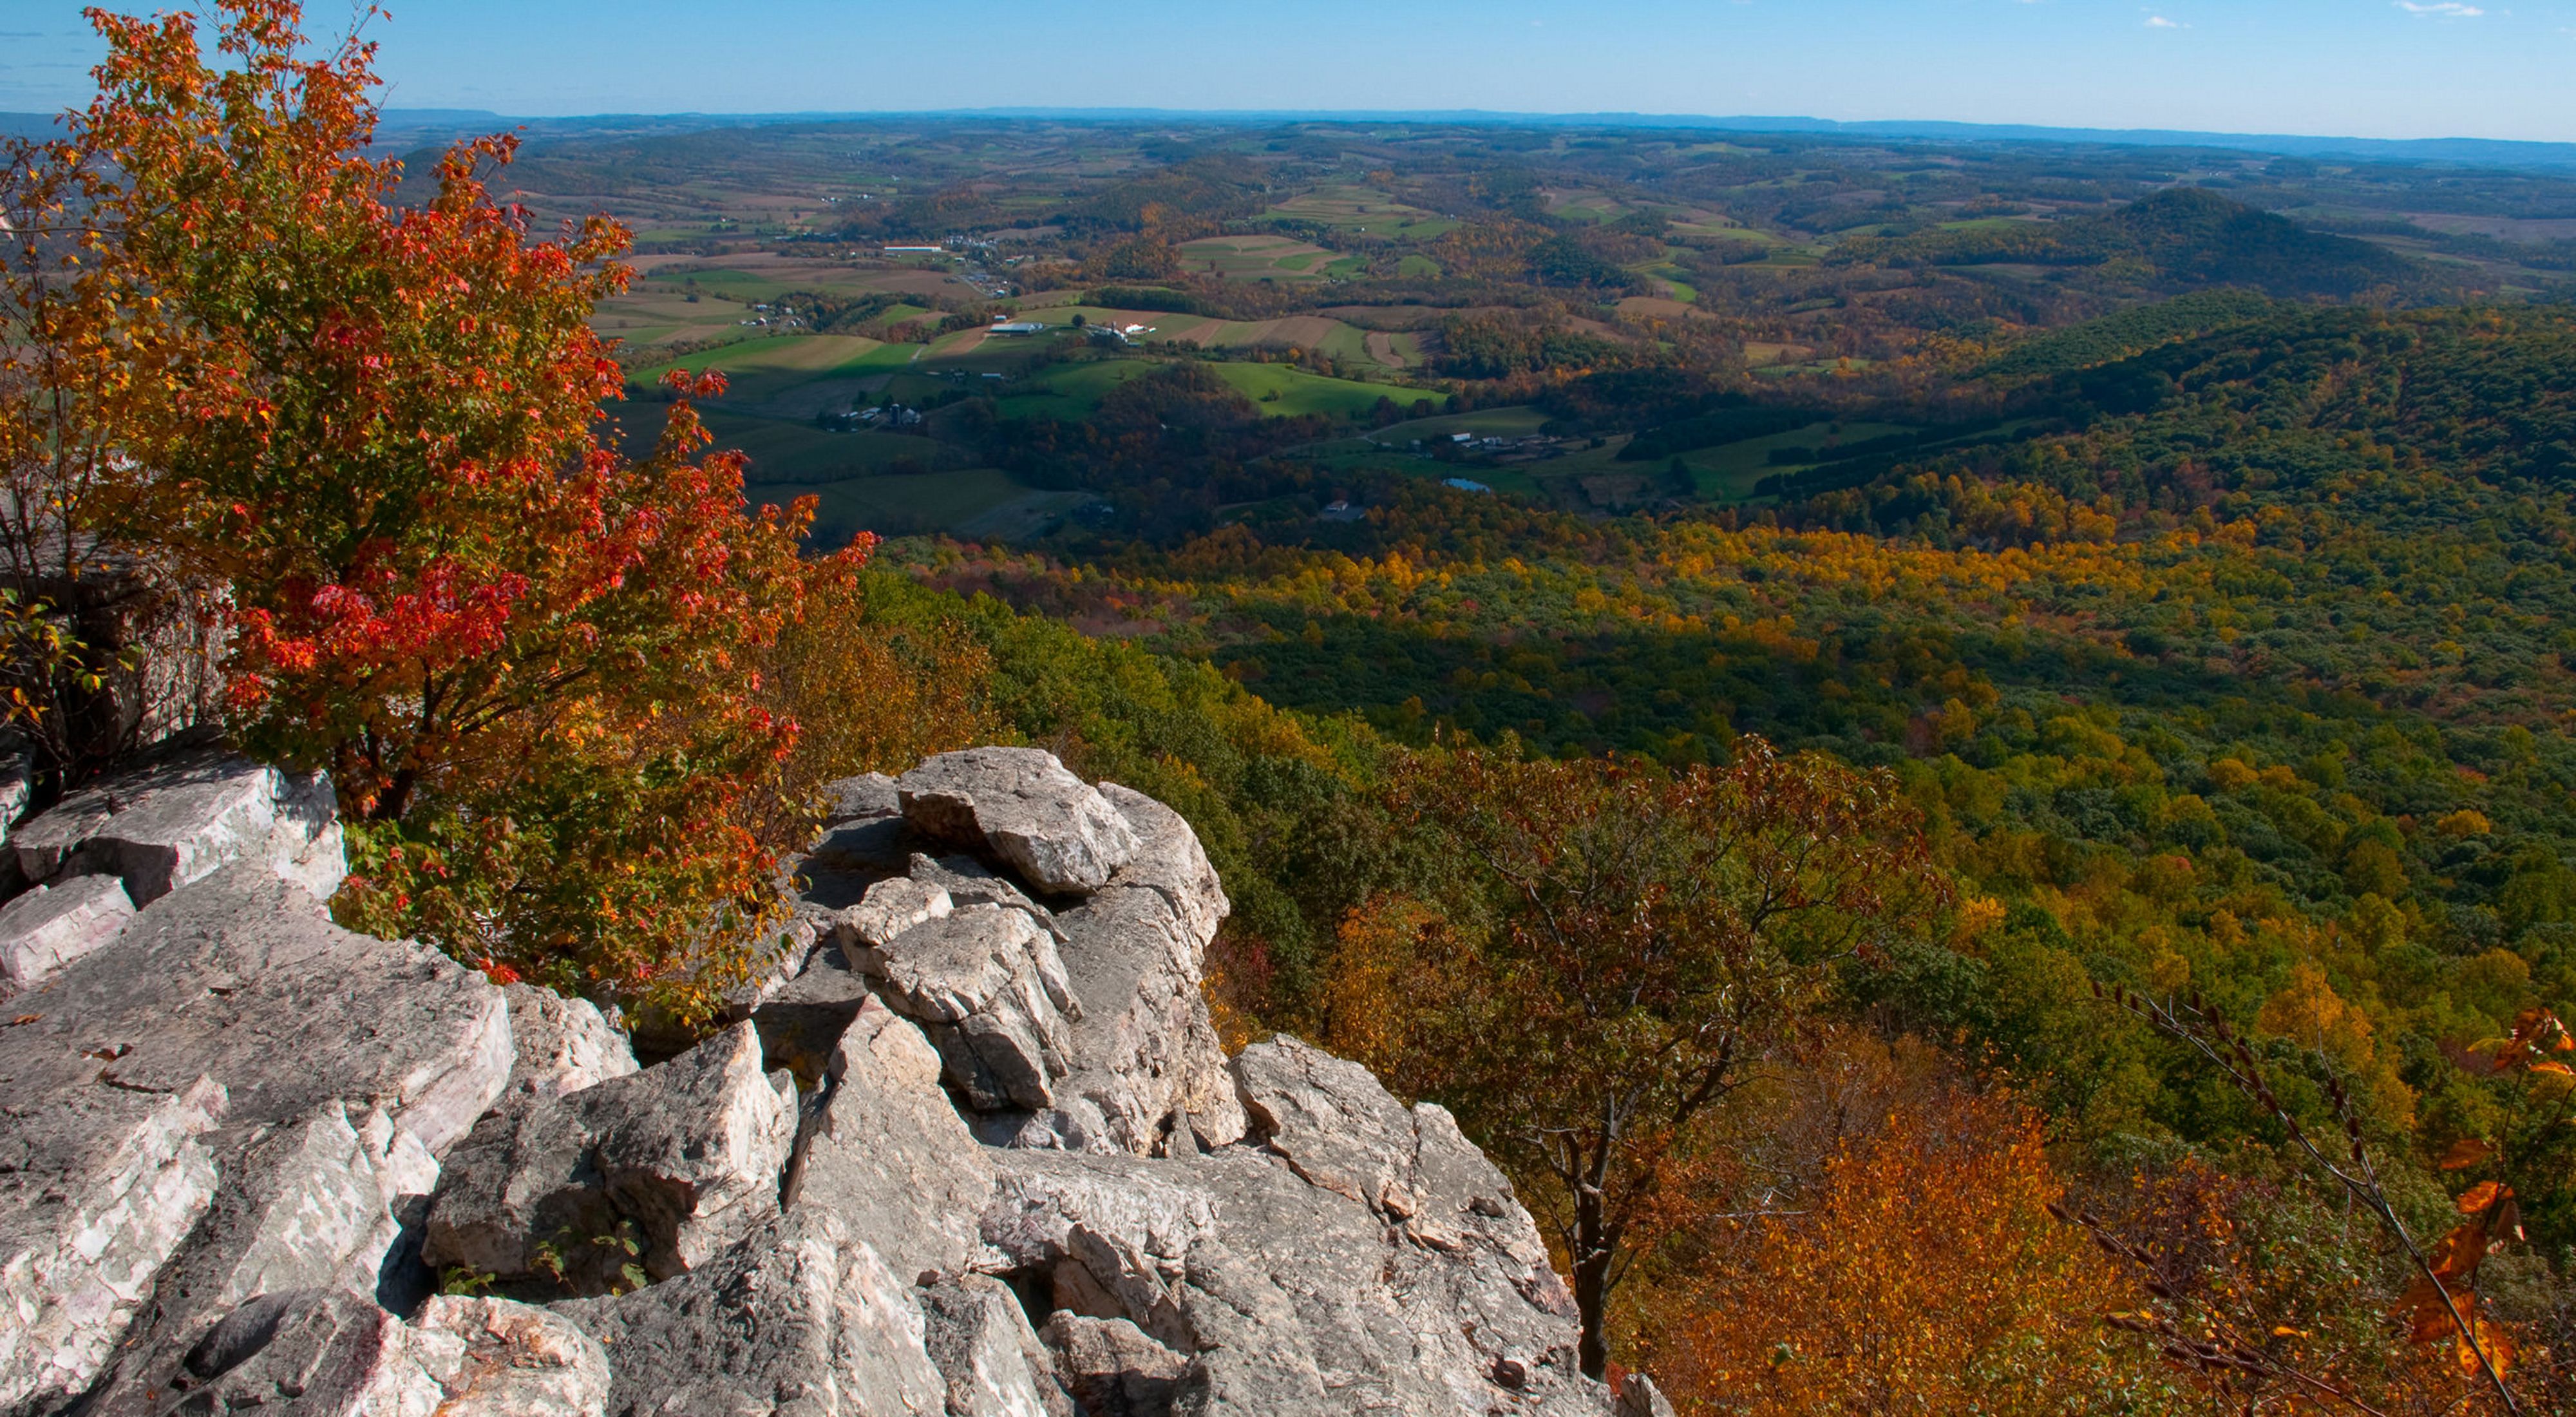 View looking out over a rolling valley of forests that extends to the horizon. A outcrop of rock dominates the foreground.